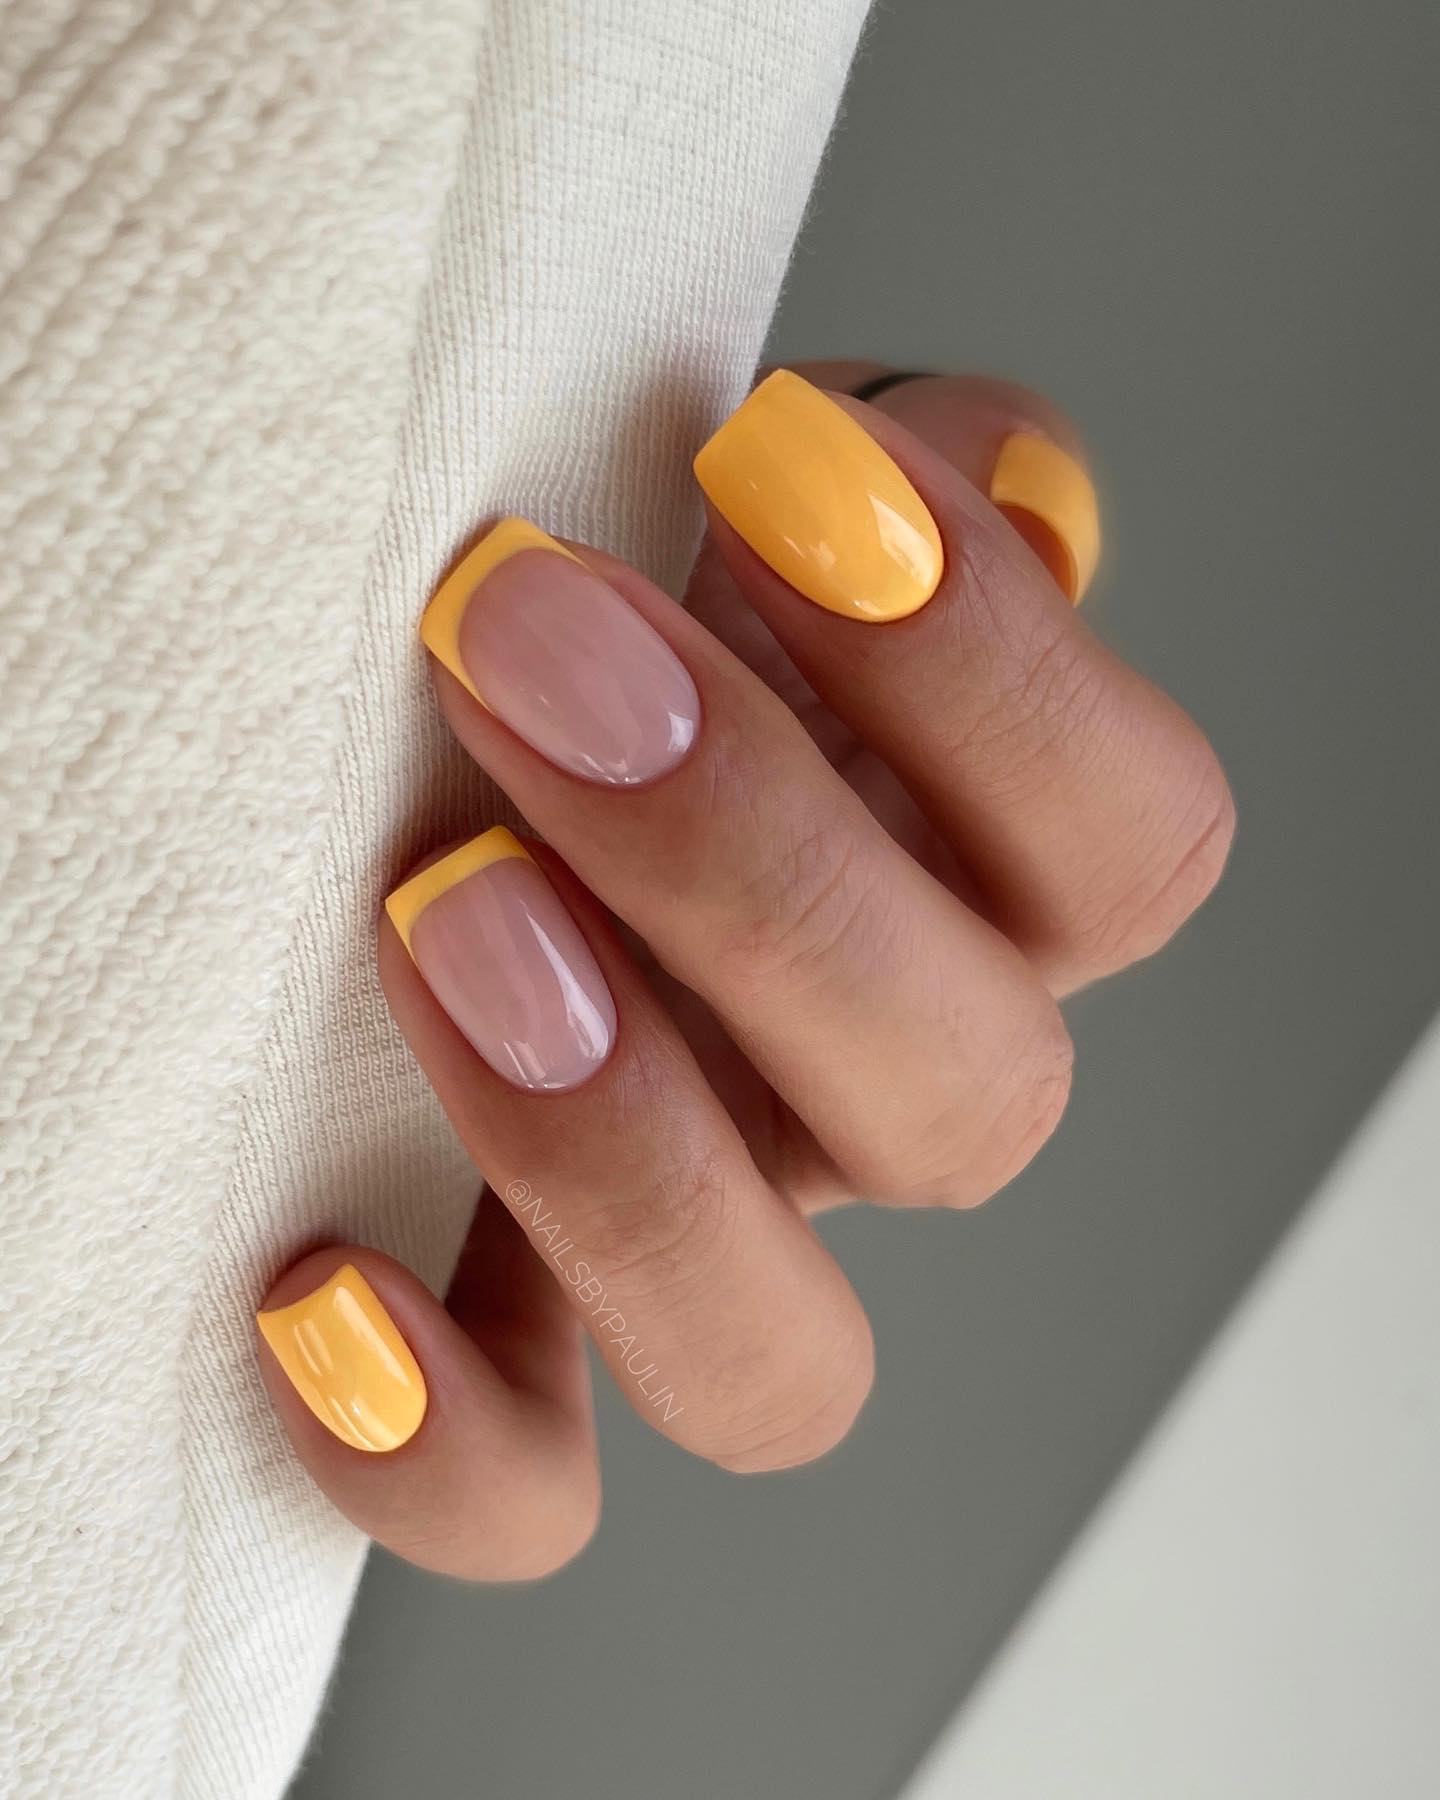 Short Orange Nails with French Tips